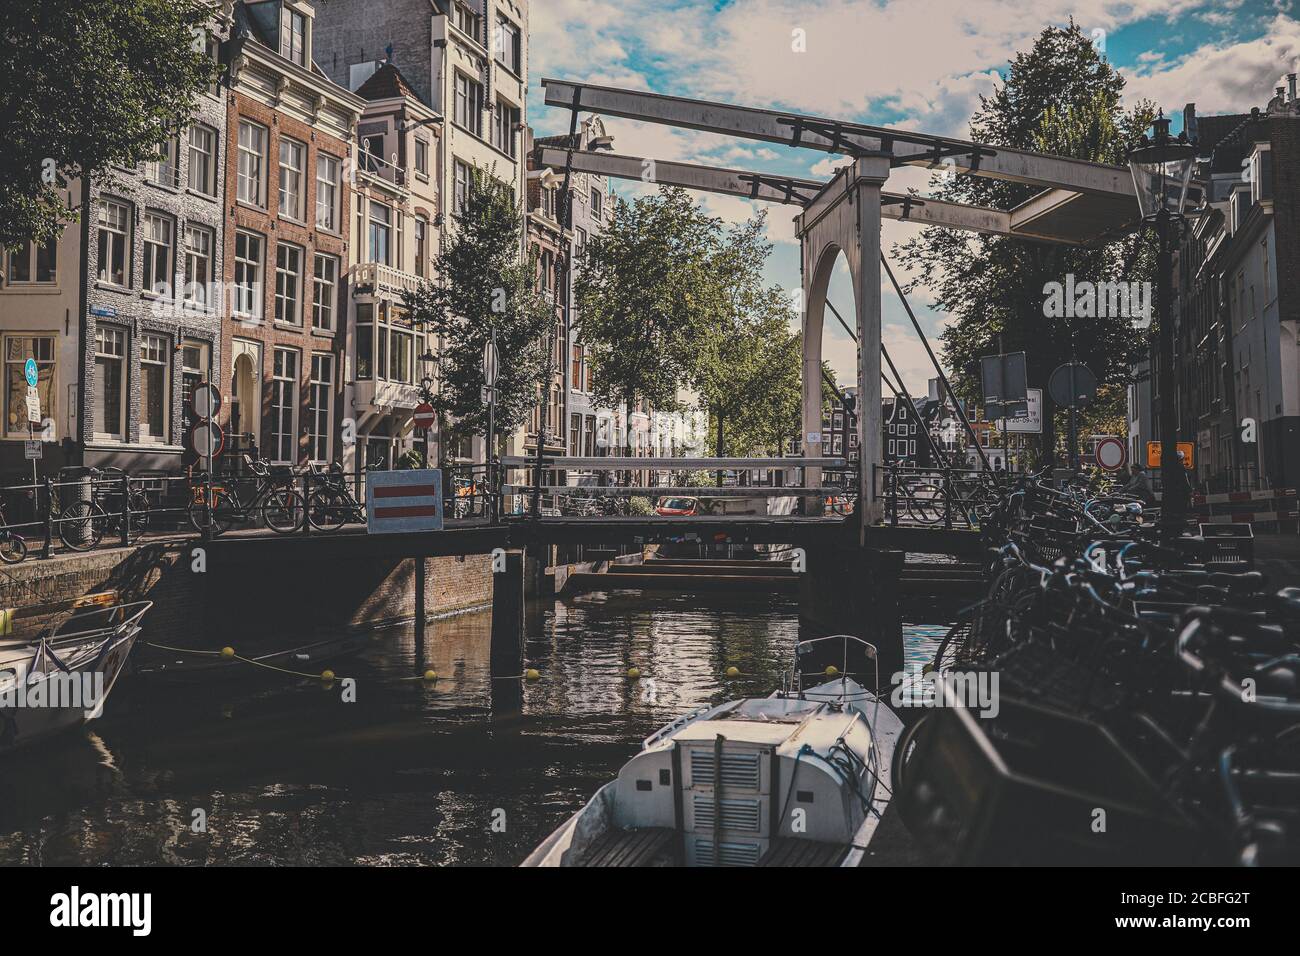 Canals In Amsterdam Stock Photo